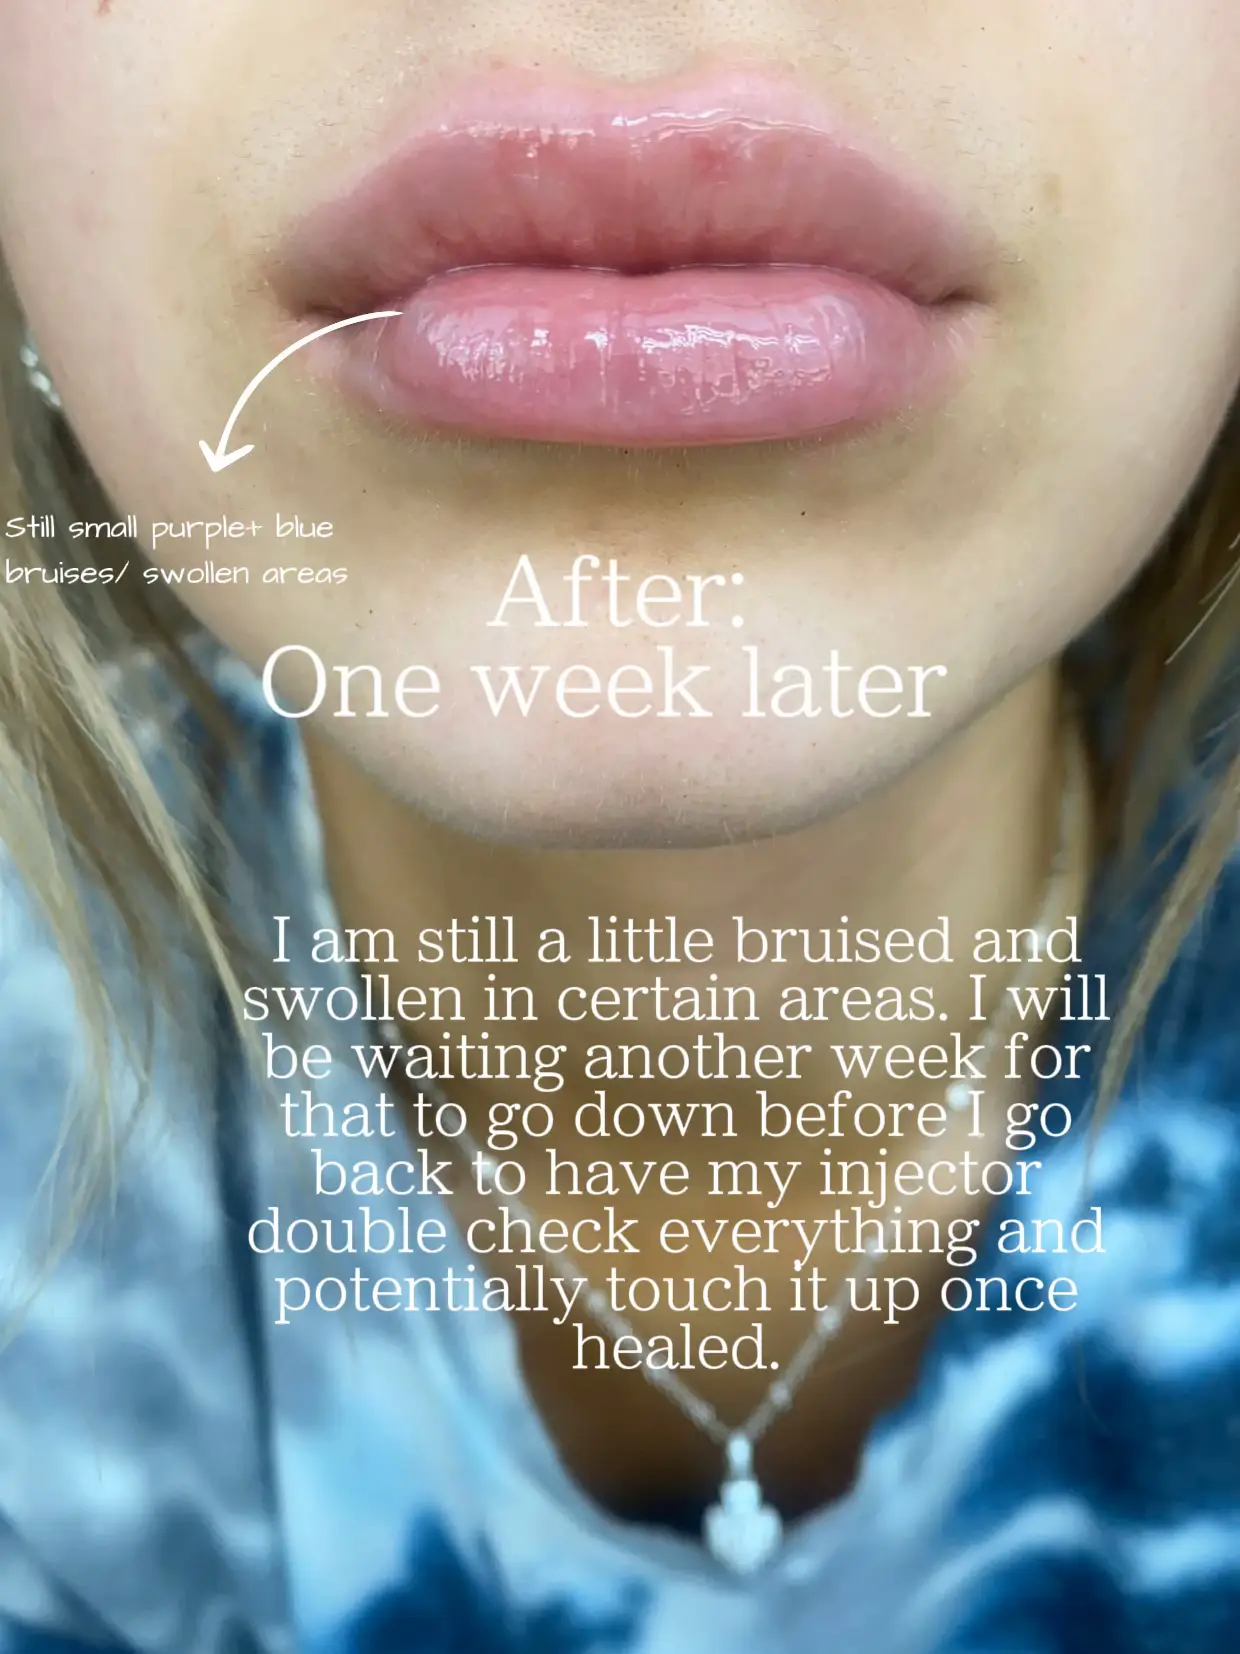 recovering from lip enhancement treatment - Lemon8 Search